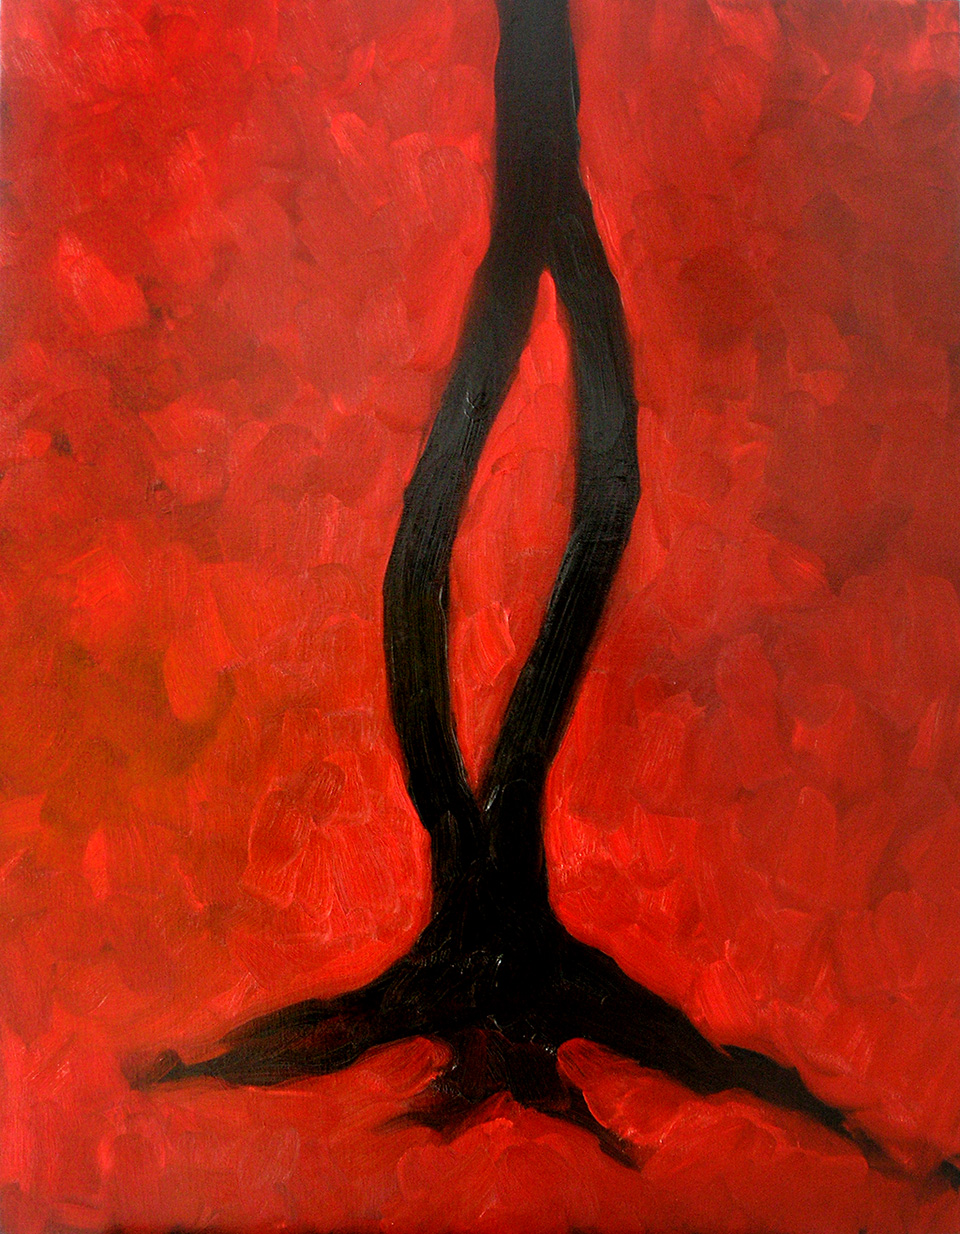 Tree 9, a painting by Guido Vrolix